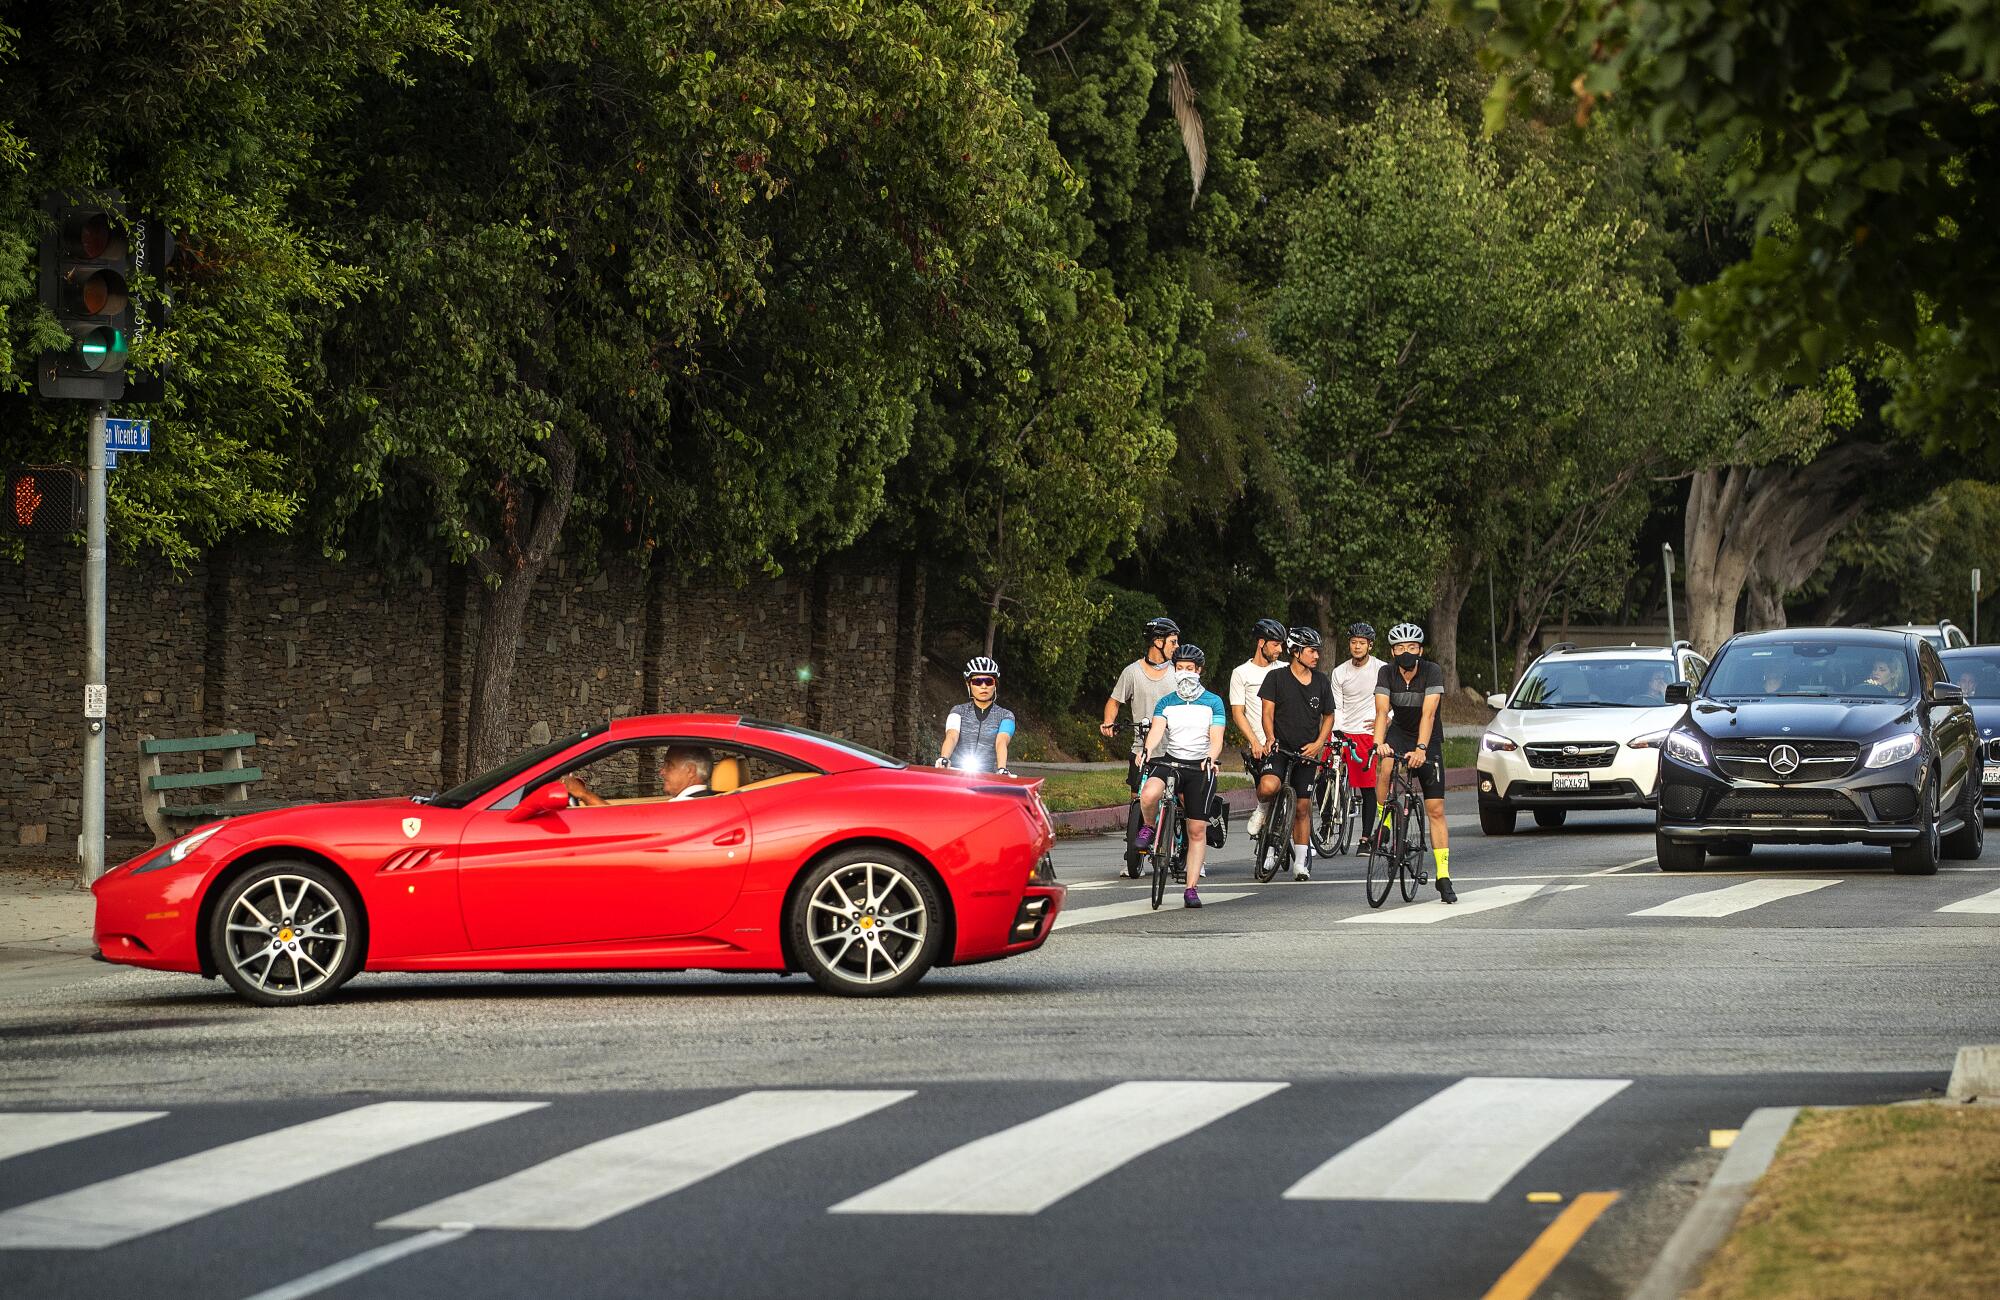 Bicyclists and motorists on San Vicente Boulevard in Brentwood.